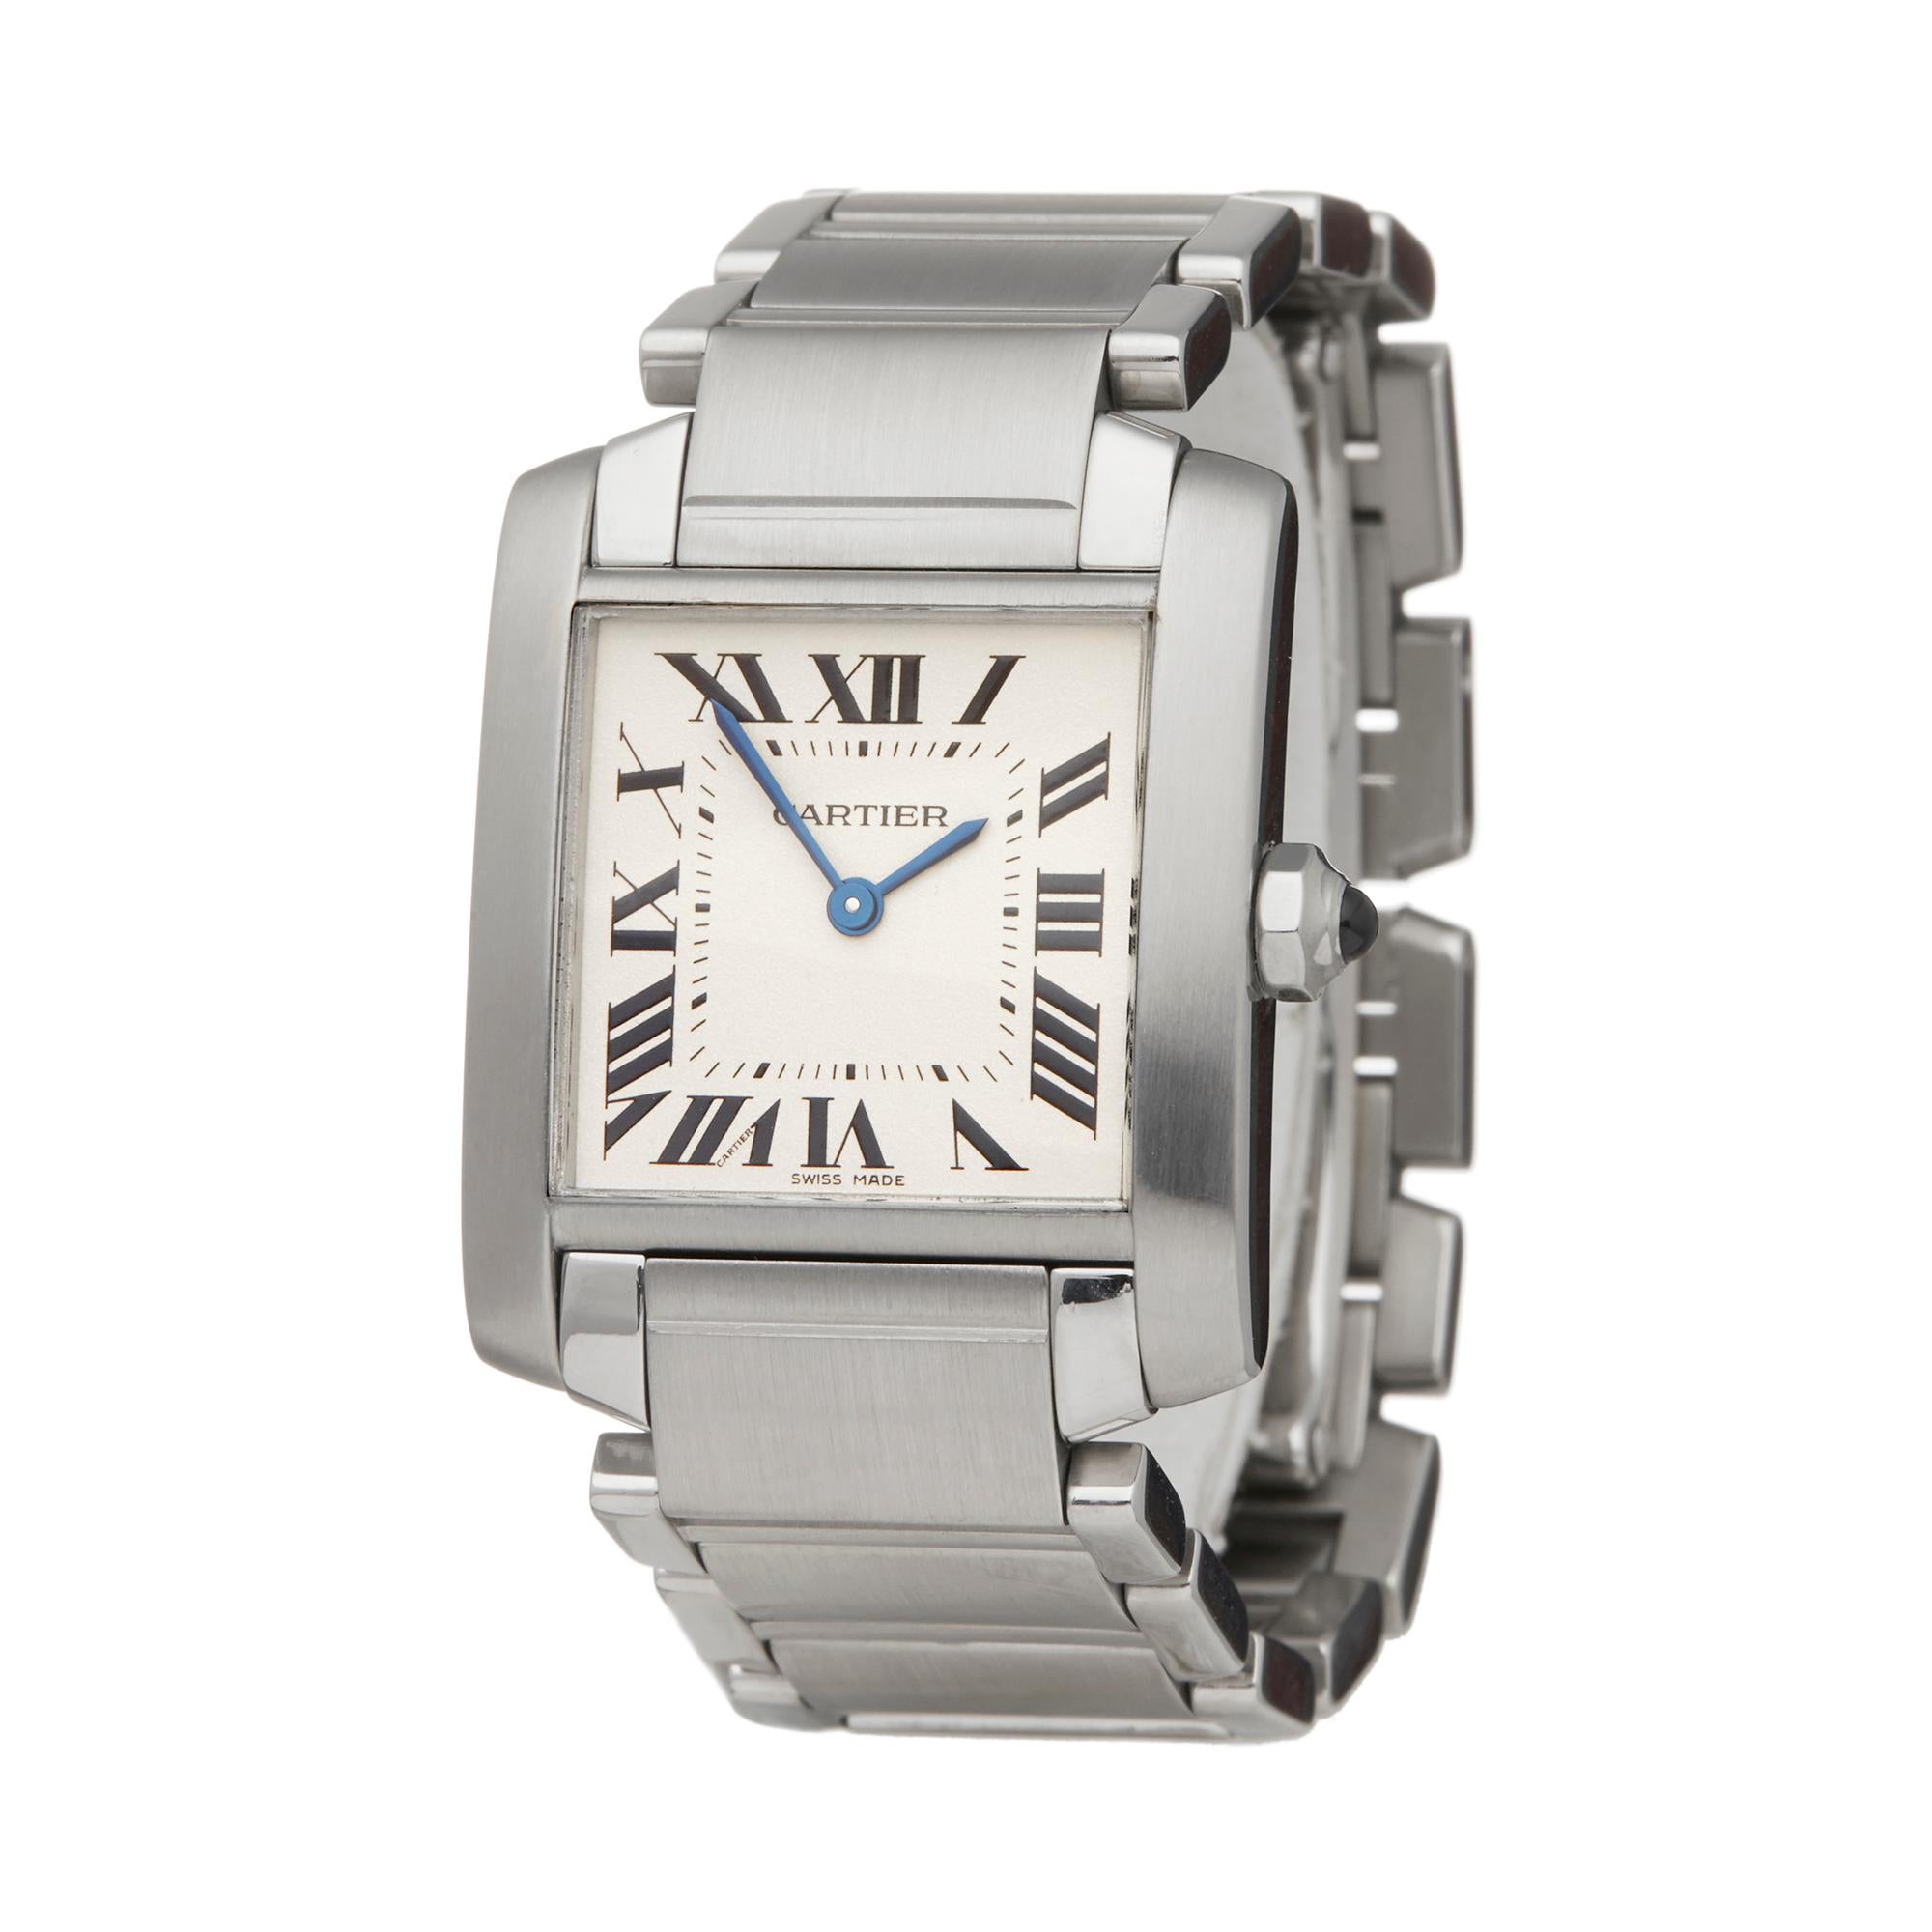 Reference: W5841
Manufacturer: Cartier
Model: Tank Francaise
Model Reference: 2301
Age: Circa 2000's
Gender: Women's
Box and Papers: Box, Service Papers Service Pouch
Dial: White Roman
Glass: Sapphire
Movement: Quartz
Water Resistance: To